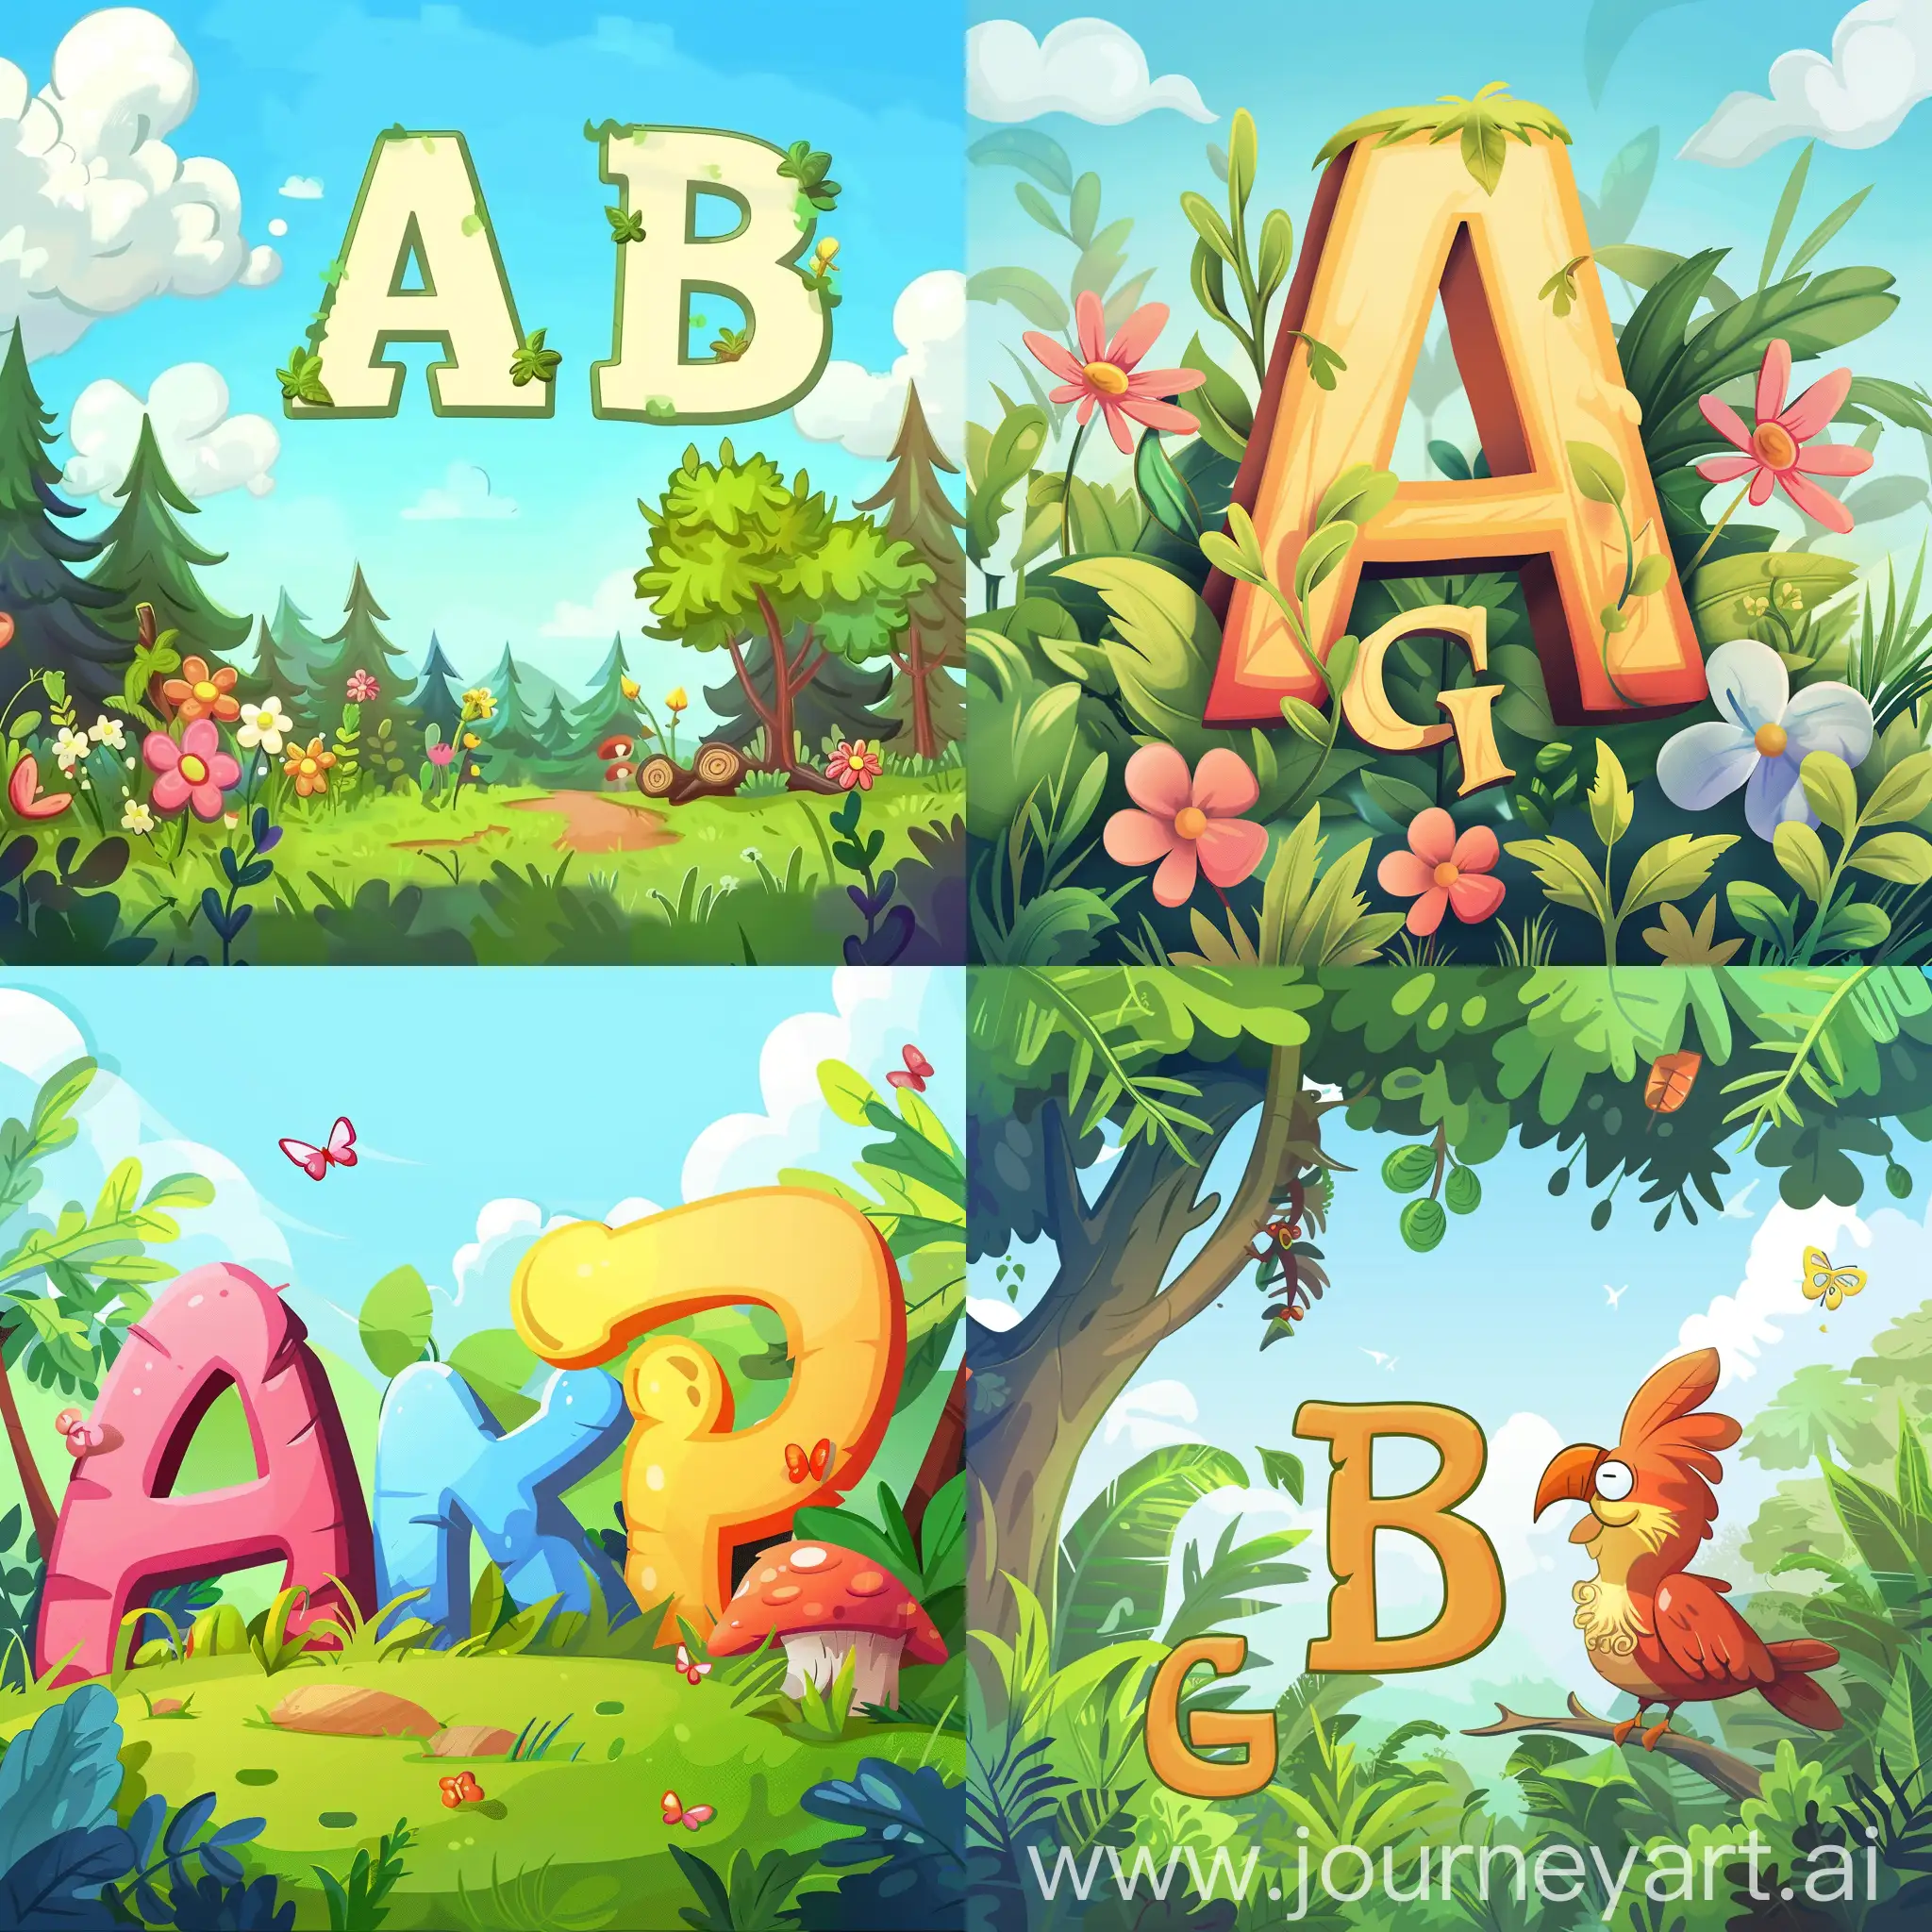 background for the game, children's style, cartoon style, letter A, B, C, G - Russian Arial font, nature